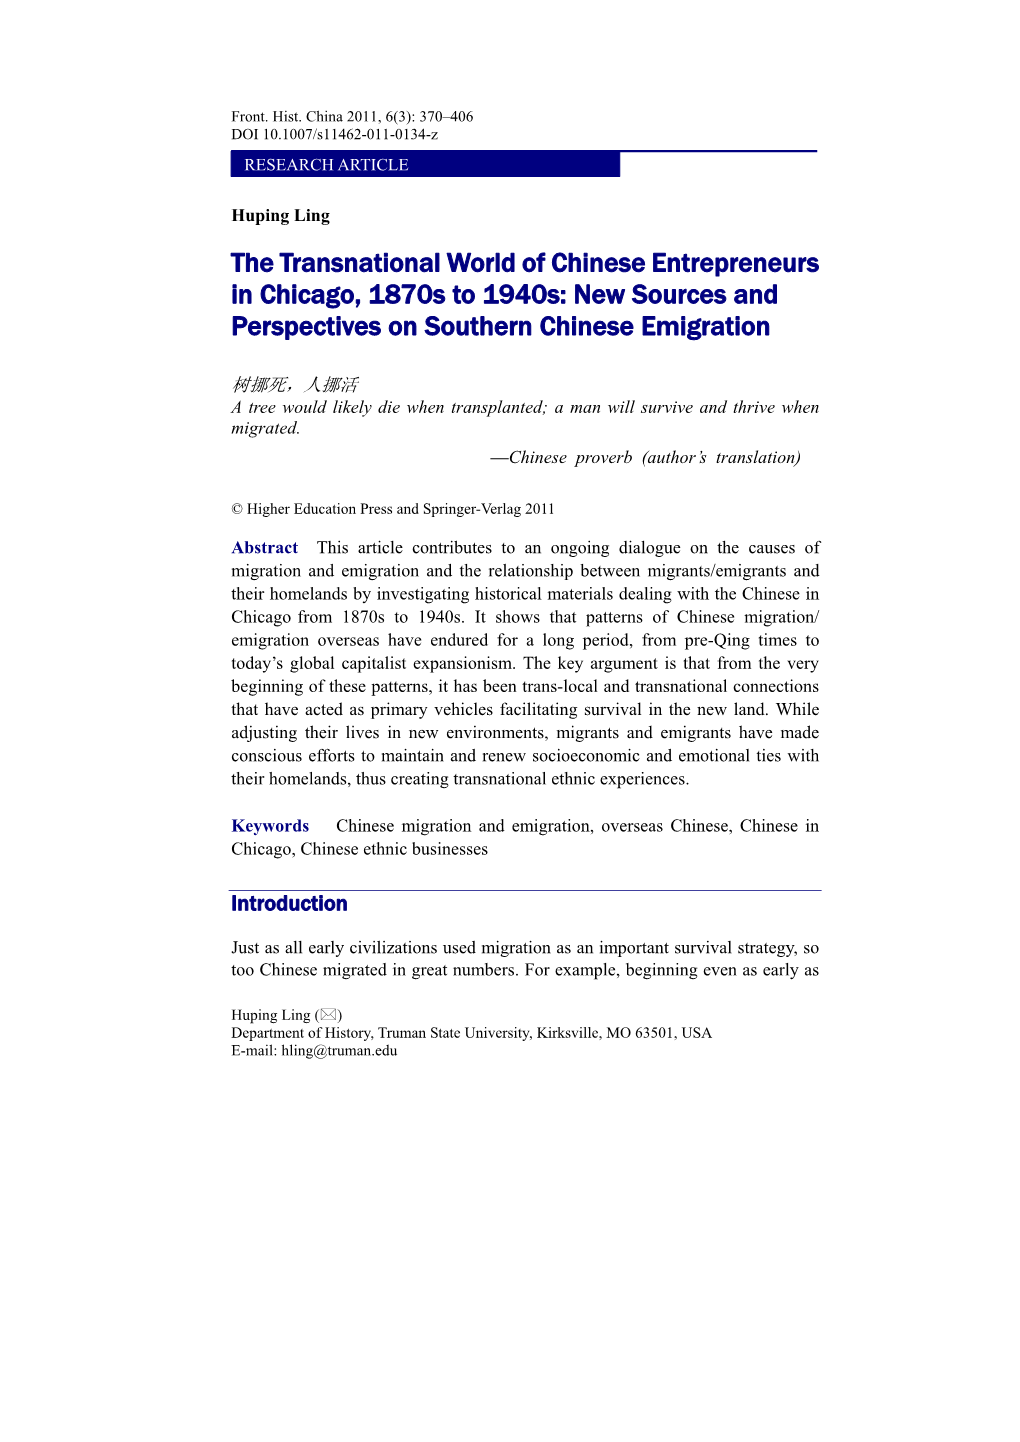 The Transnational World of Chinese Entrepreneurs in Chicago, 1870S to 1940S: New Sources and Perspectives on Southern Chinese Emigration